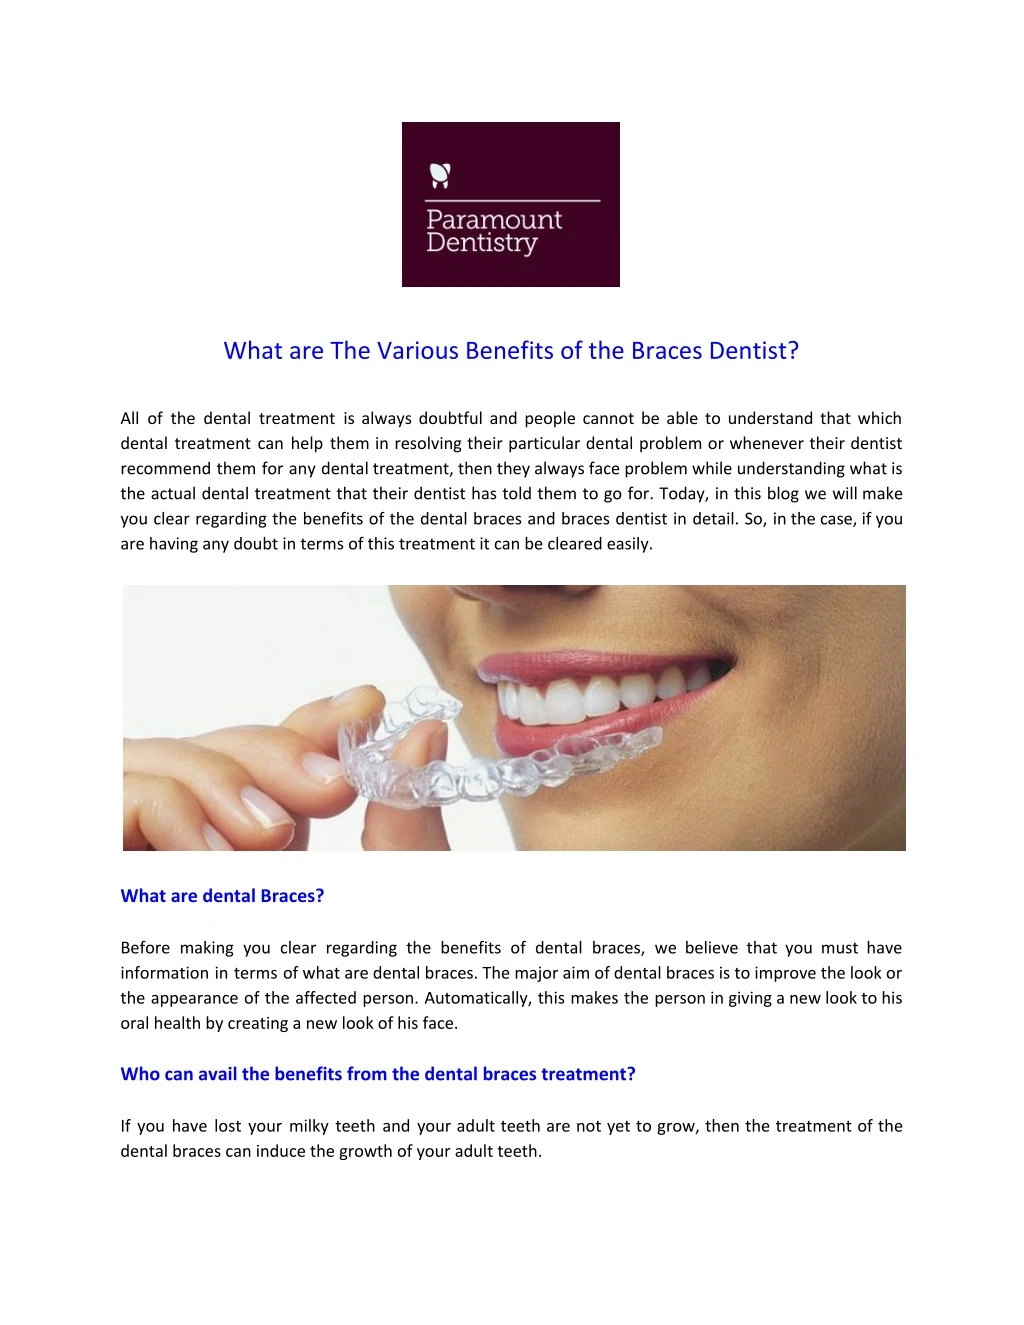 what are the various benefits of the braces